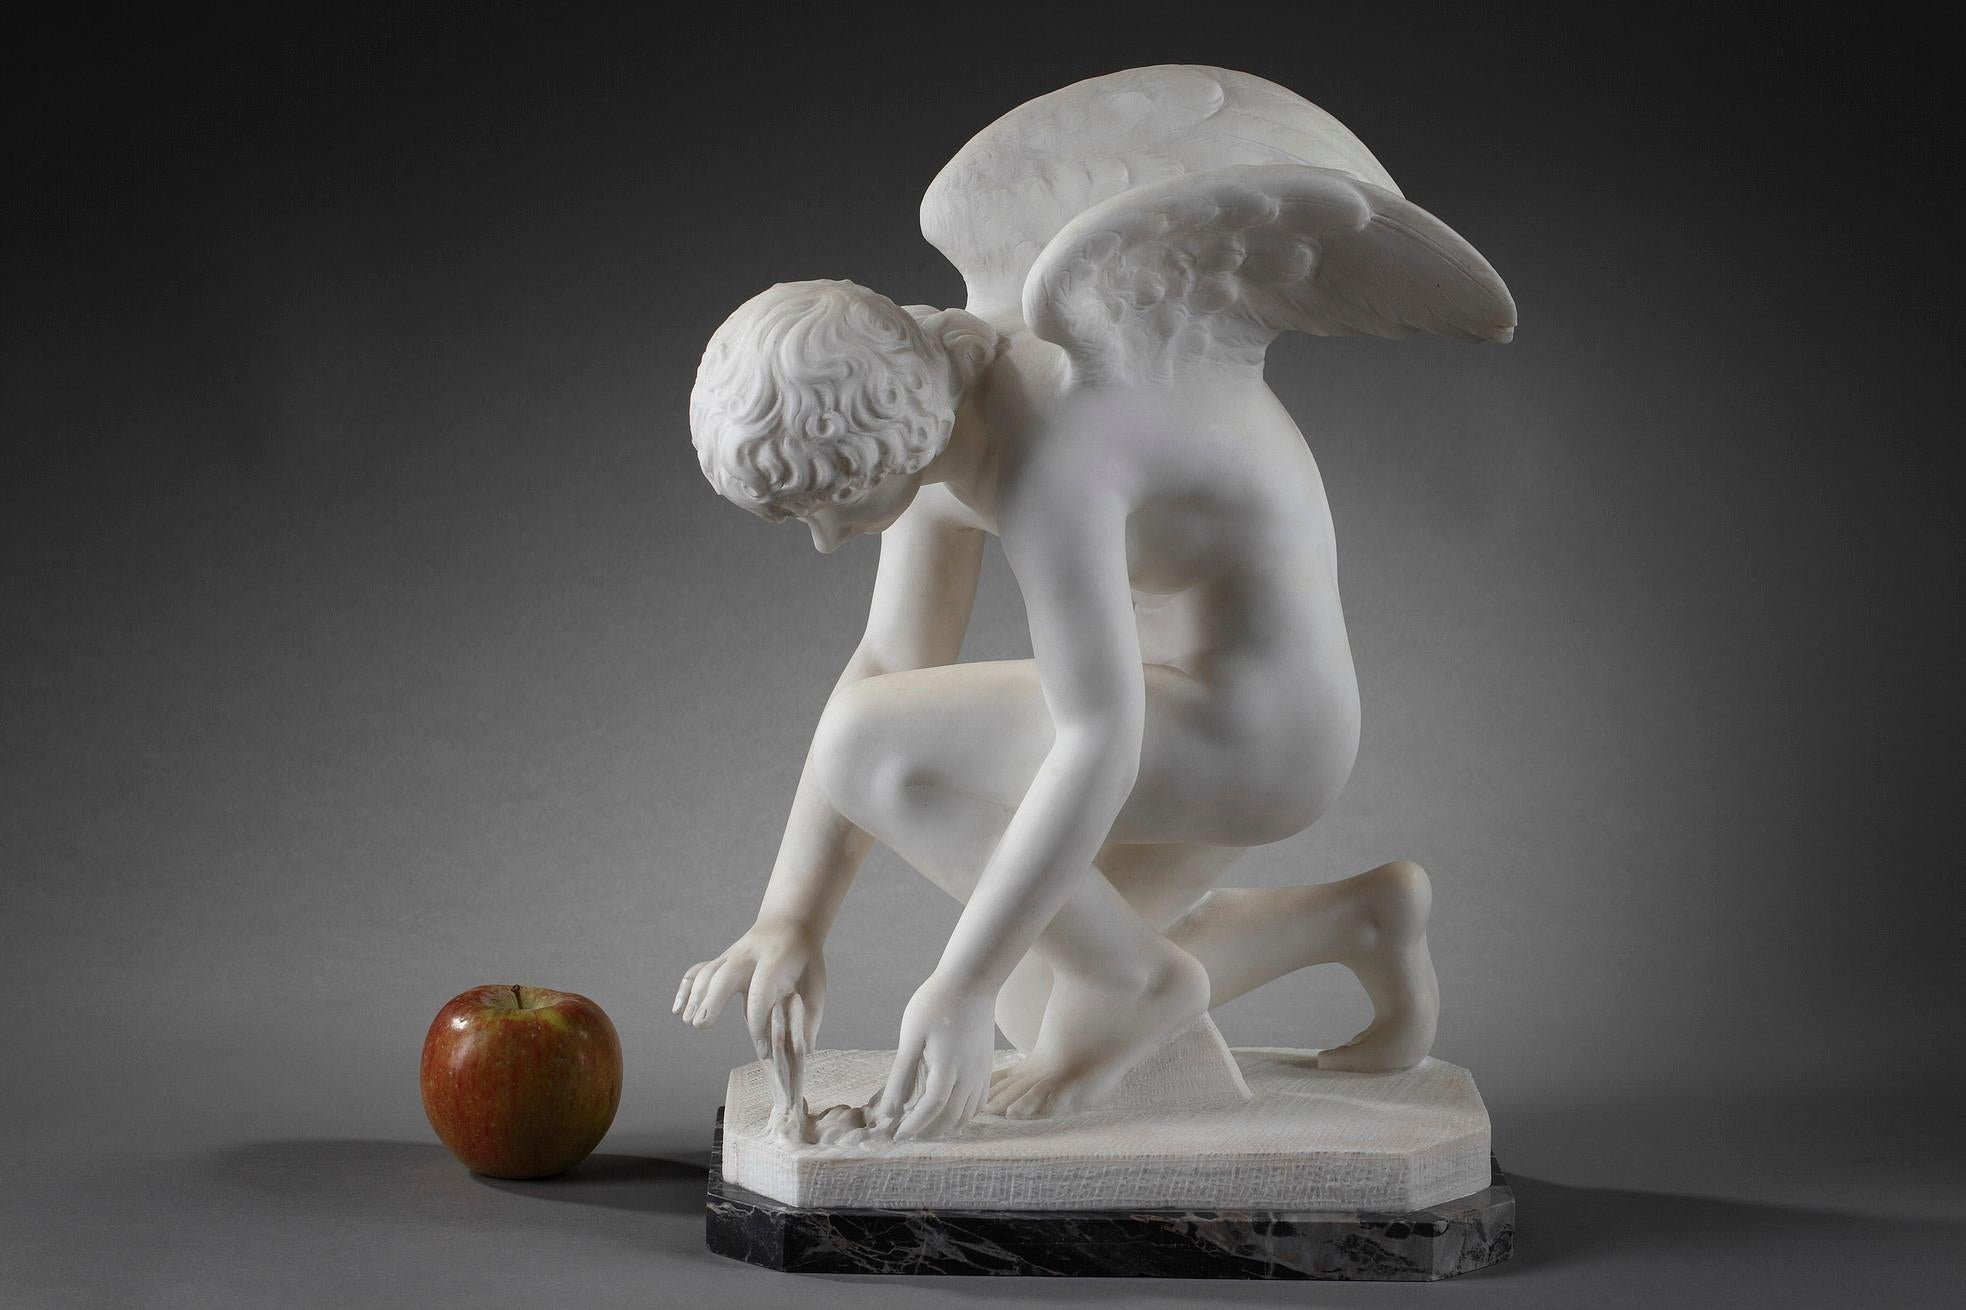 Neoclassical sculpture crafted of marble featuring Cupid, a winged adolescent, offering a rose to a butterfly he is holding by the wings.

circa 1900
Dim: W 11,4 in - D 6.7in - H 15.4in.
Dim: L 29cm, P 17cm, H 39cm.

The butterfly, a prisoner,